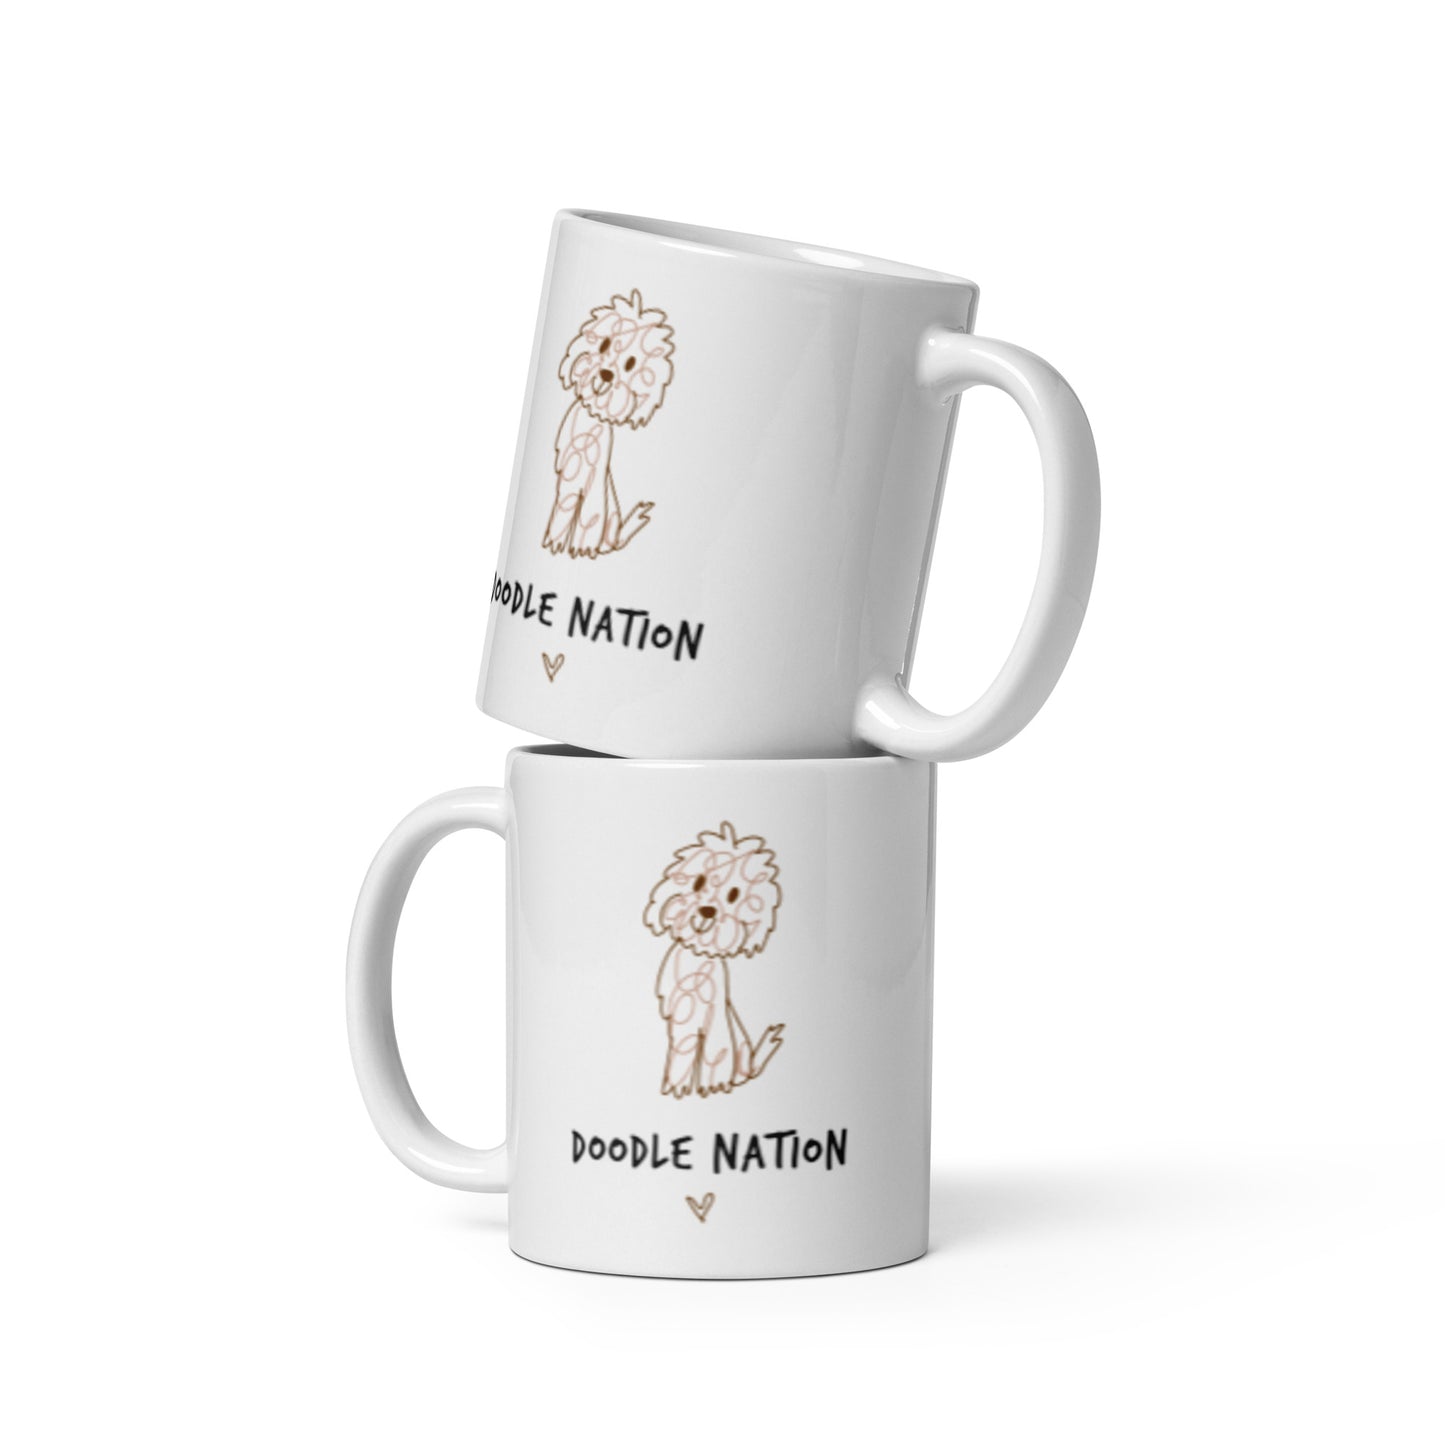 White ceramic coffee mug with cute doodle dog design and words Doodle Nation